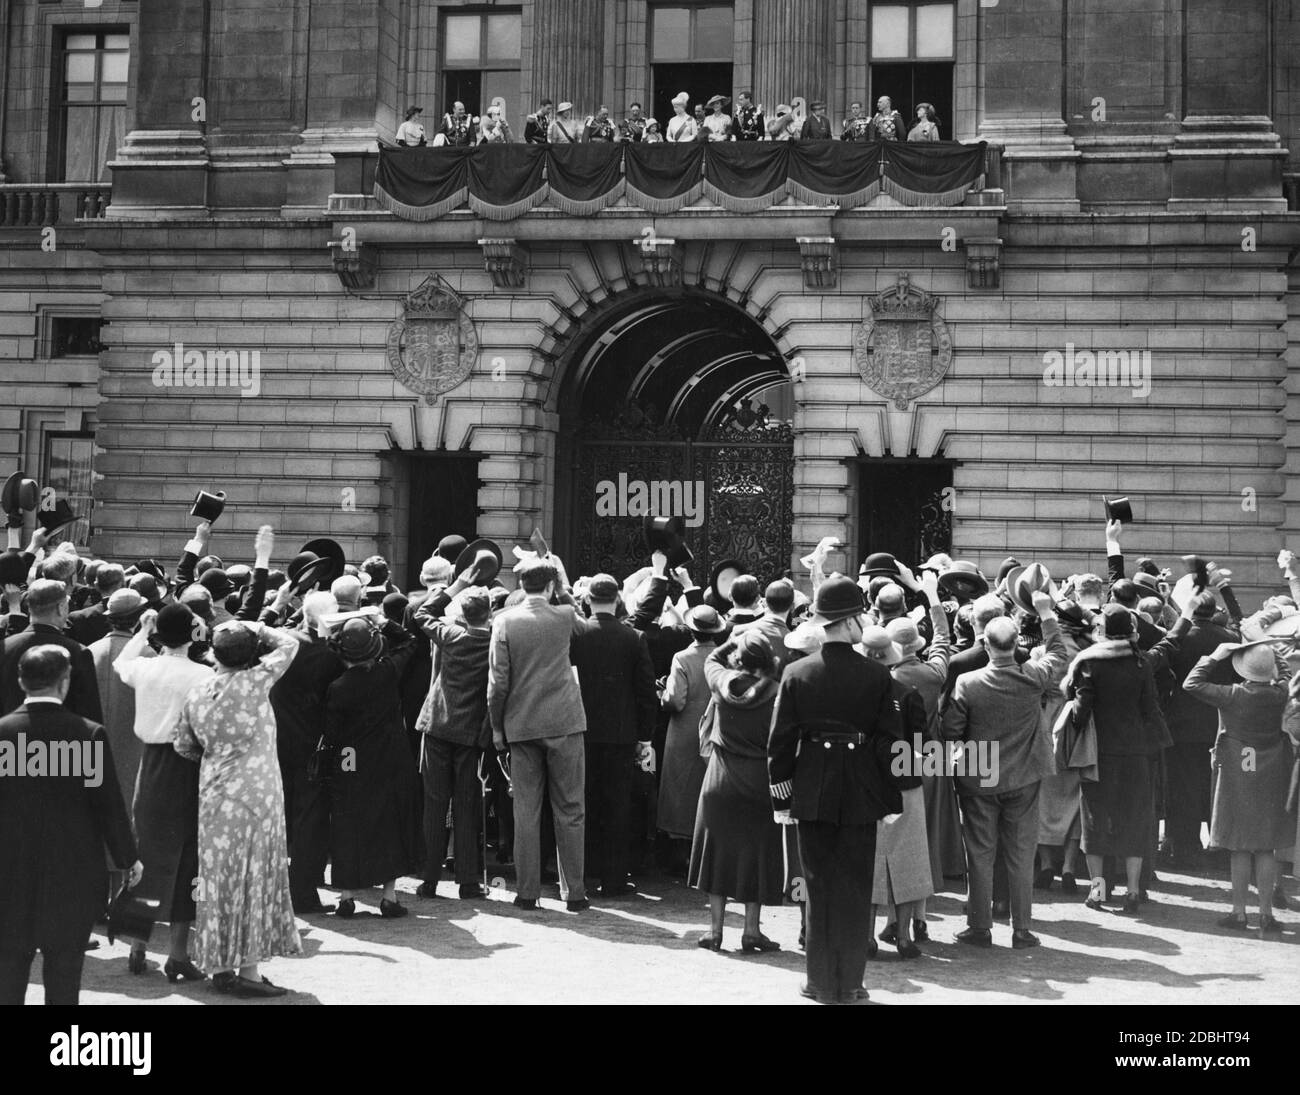 A crowd cheers King George V and his family on the balcony of Buckingham Palace after their return from St. Paul's on the occasion of the celebration of his 25th throne anniversary. Stock Photo